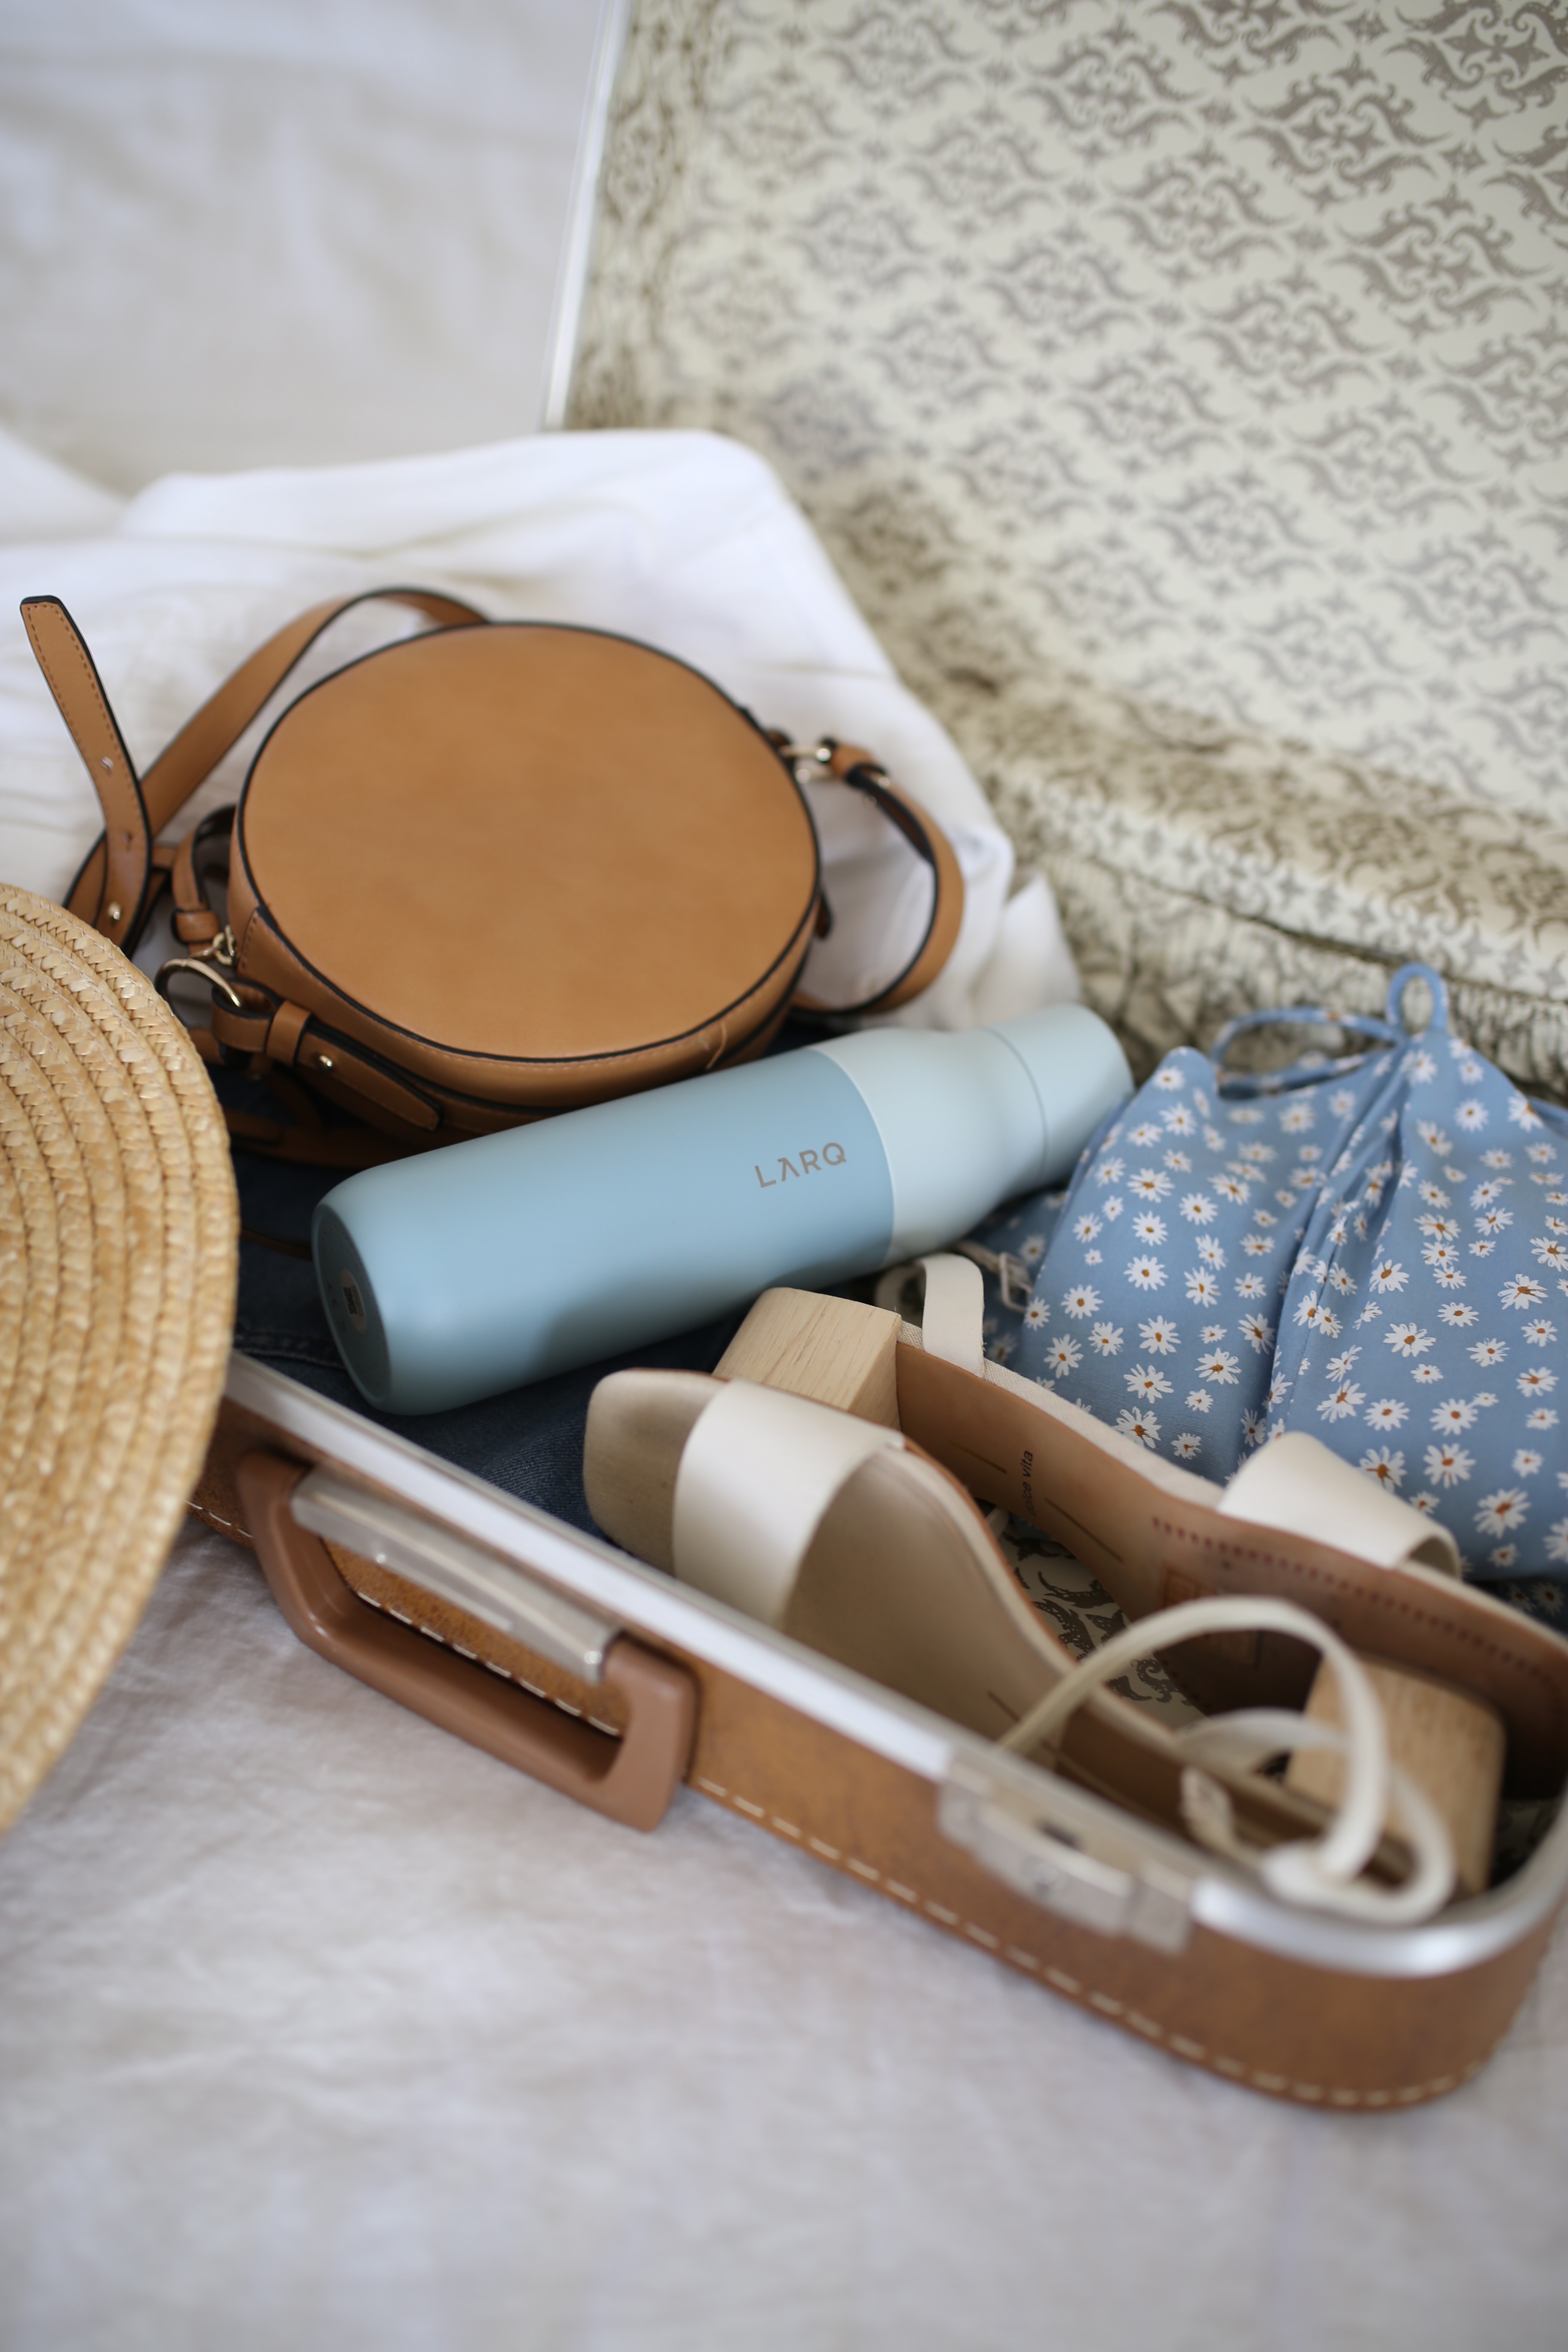 A mini suitcase open with shoes, a handbag and a hat